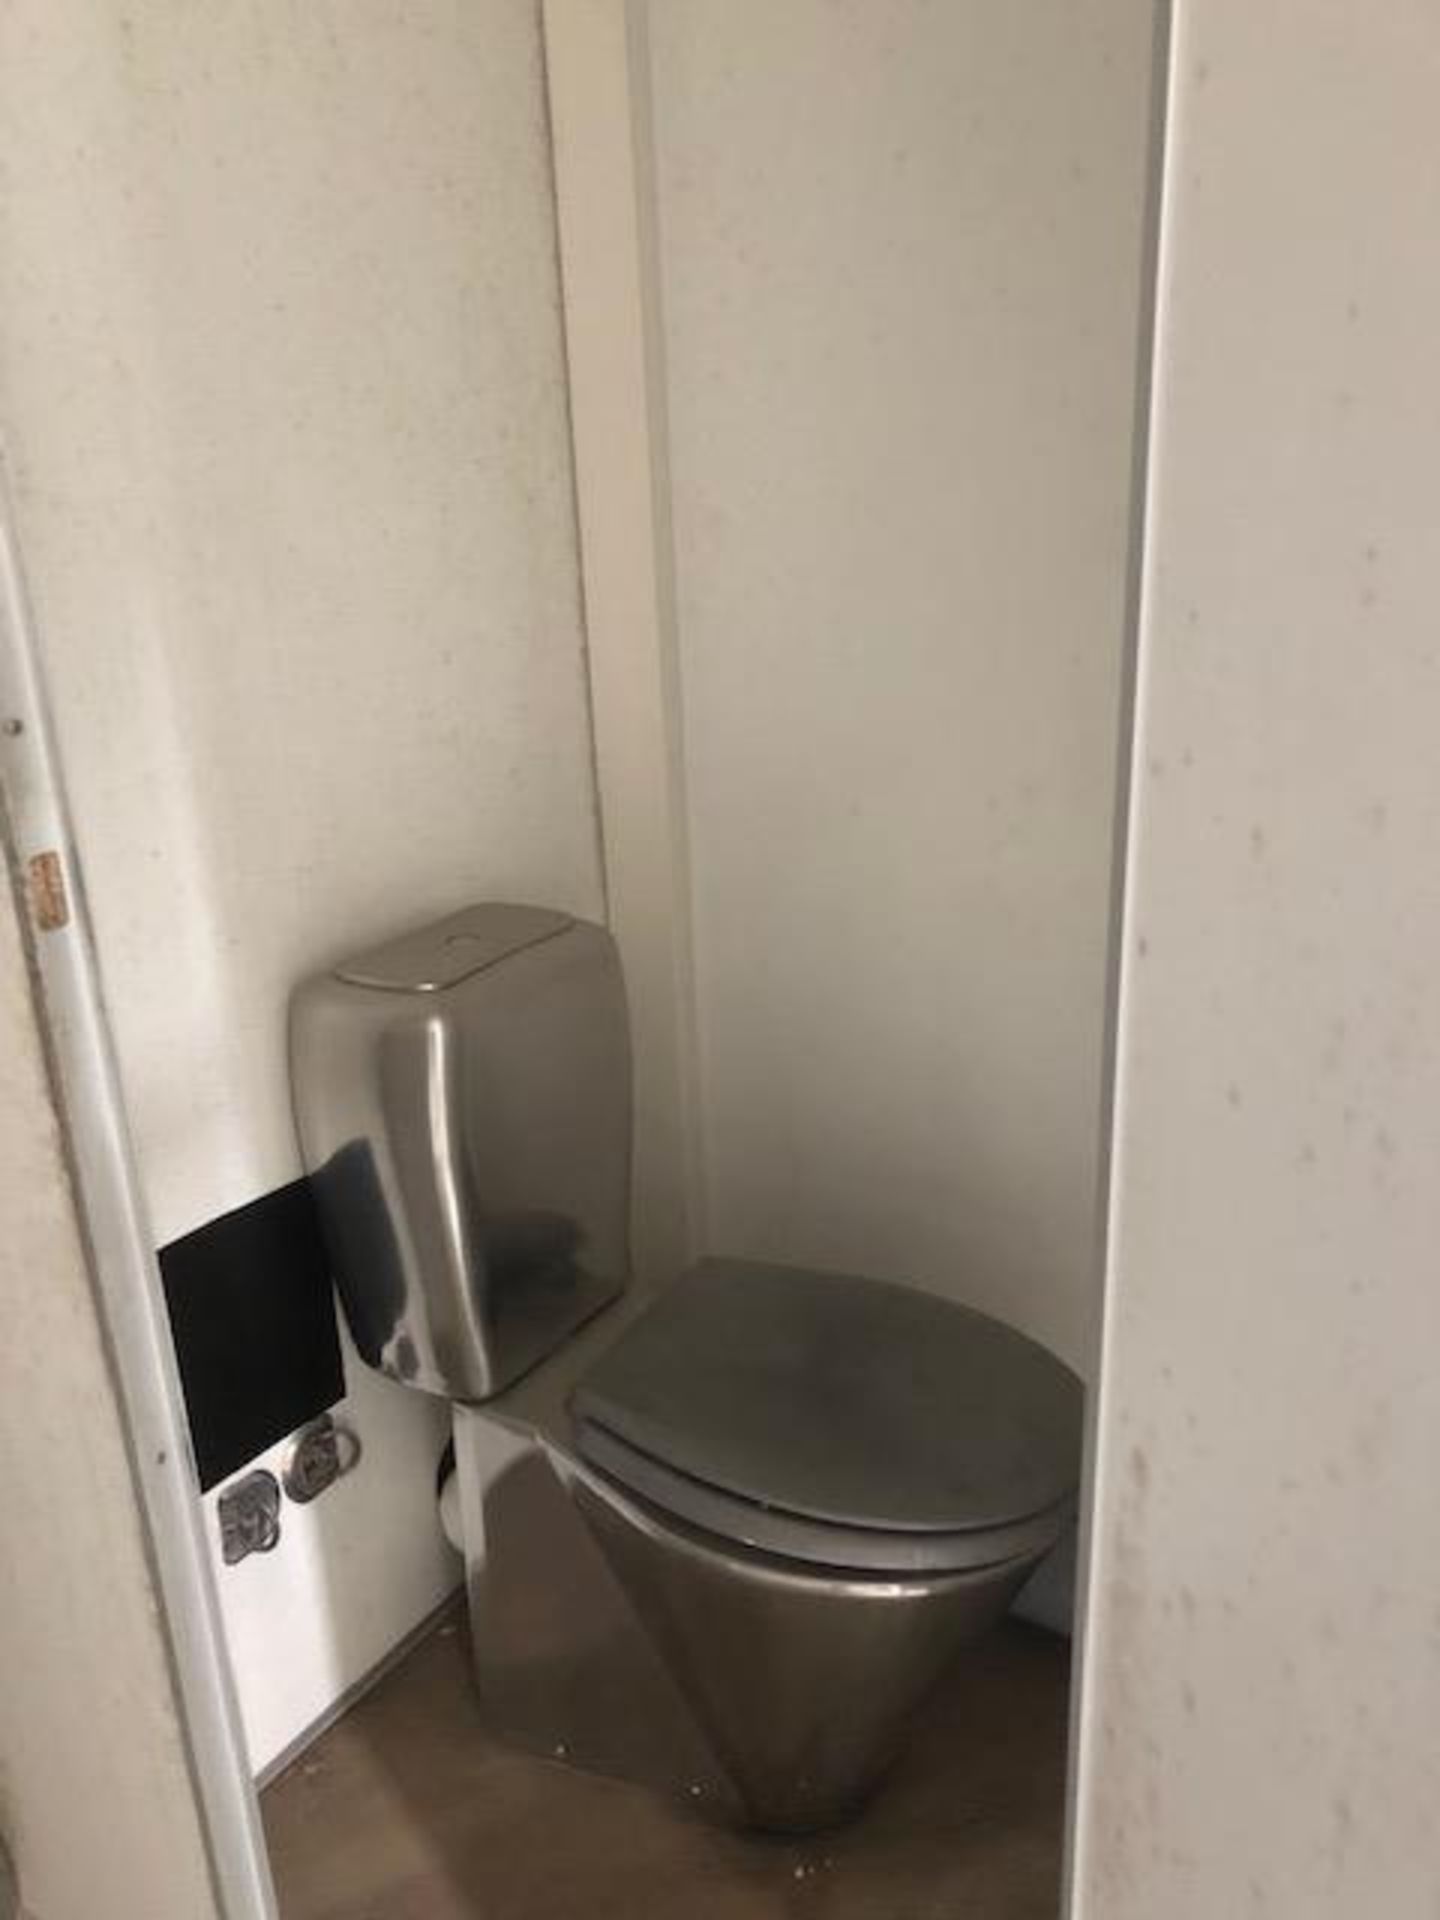 Frontline toilet and shower block unit - Image 8 of 28